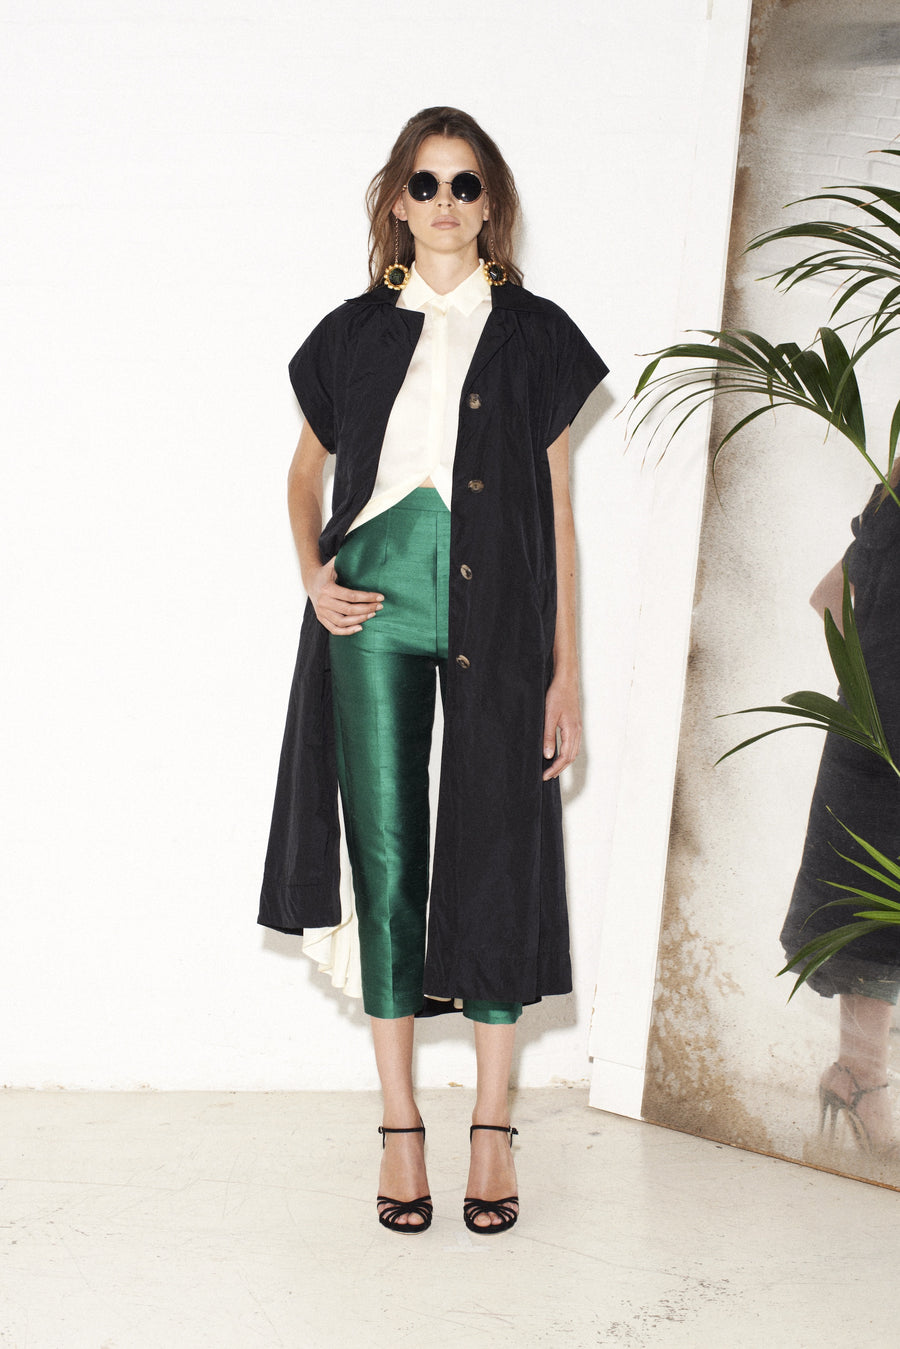 SS2013 / Look 1